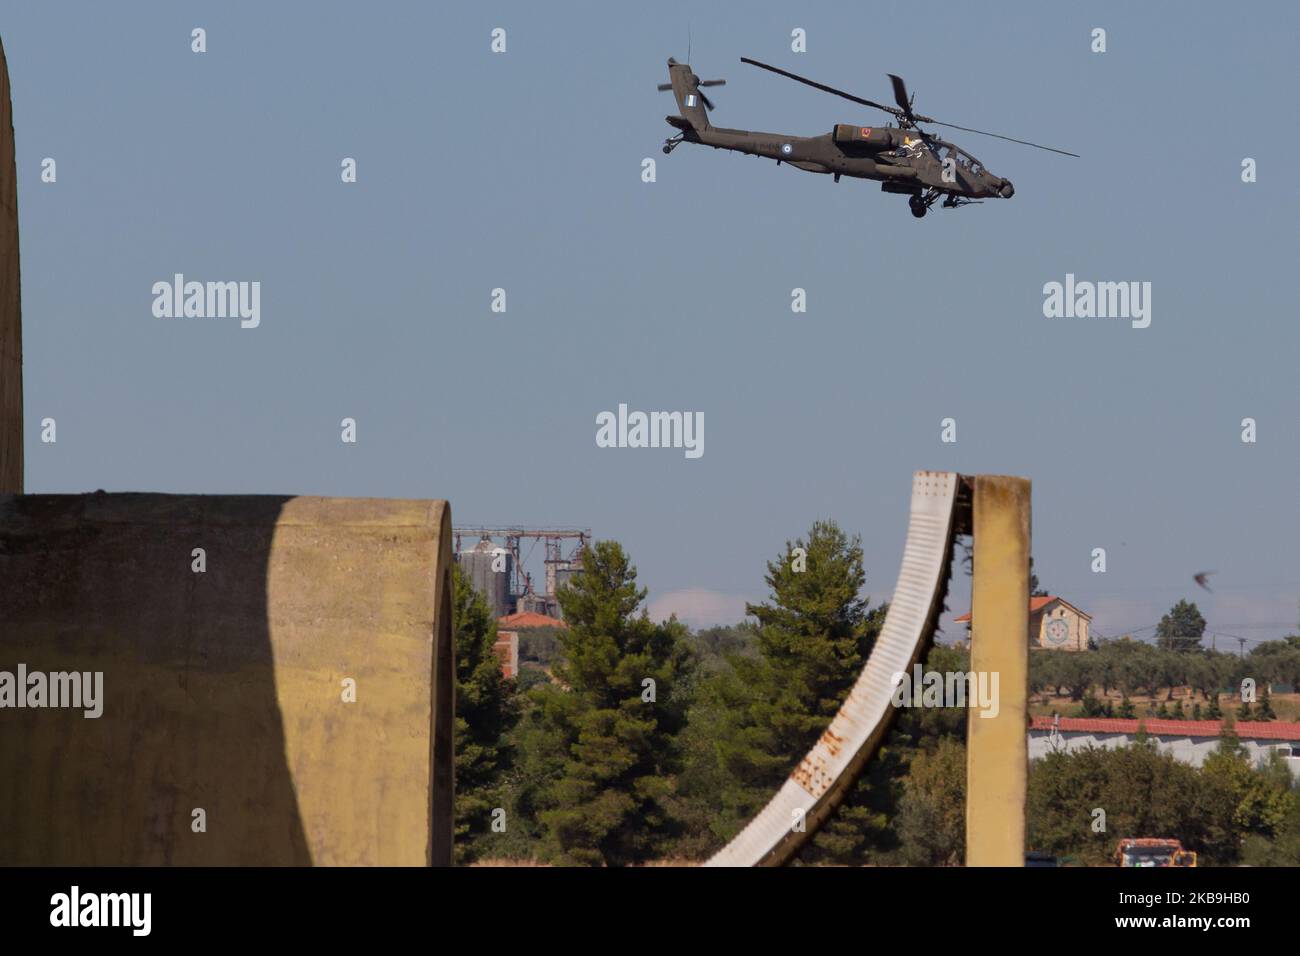 Boeing AH-64 Apache of the Hellenic Army Aviation. The AH-64D Apache Longbow Attack Helicopter participating at a static and the flying display demonstration with Pegasus Team chopper at Athens Flying Week Air Show 2019 at Tanagra Military Airbase LGTG. Athens, Greece - September 22, 2019 (Photo by Nicolas Economou/NurPhoto) Stock Photo